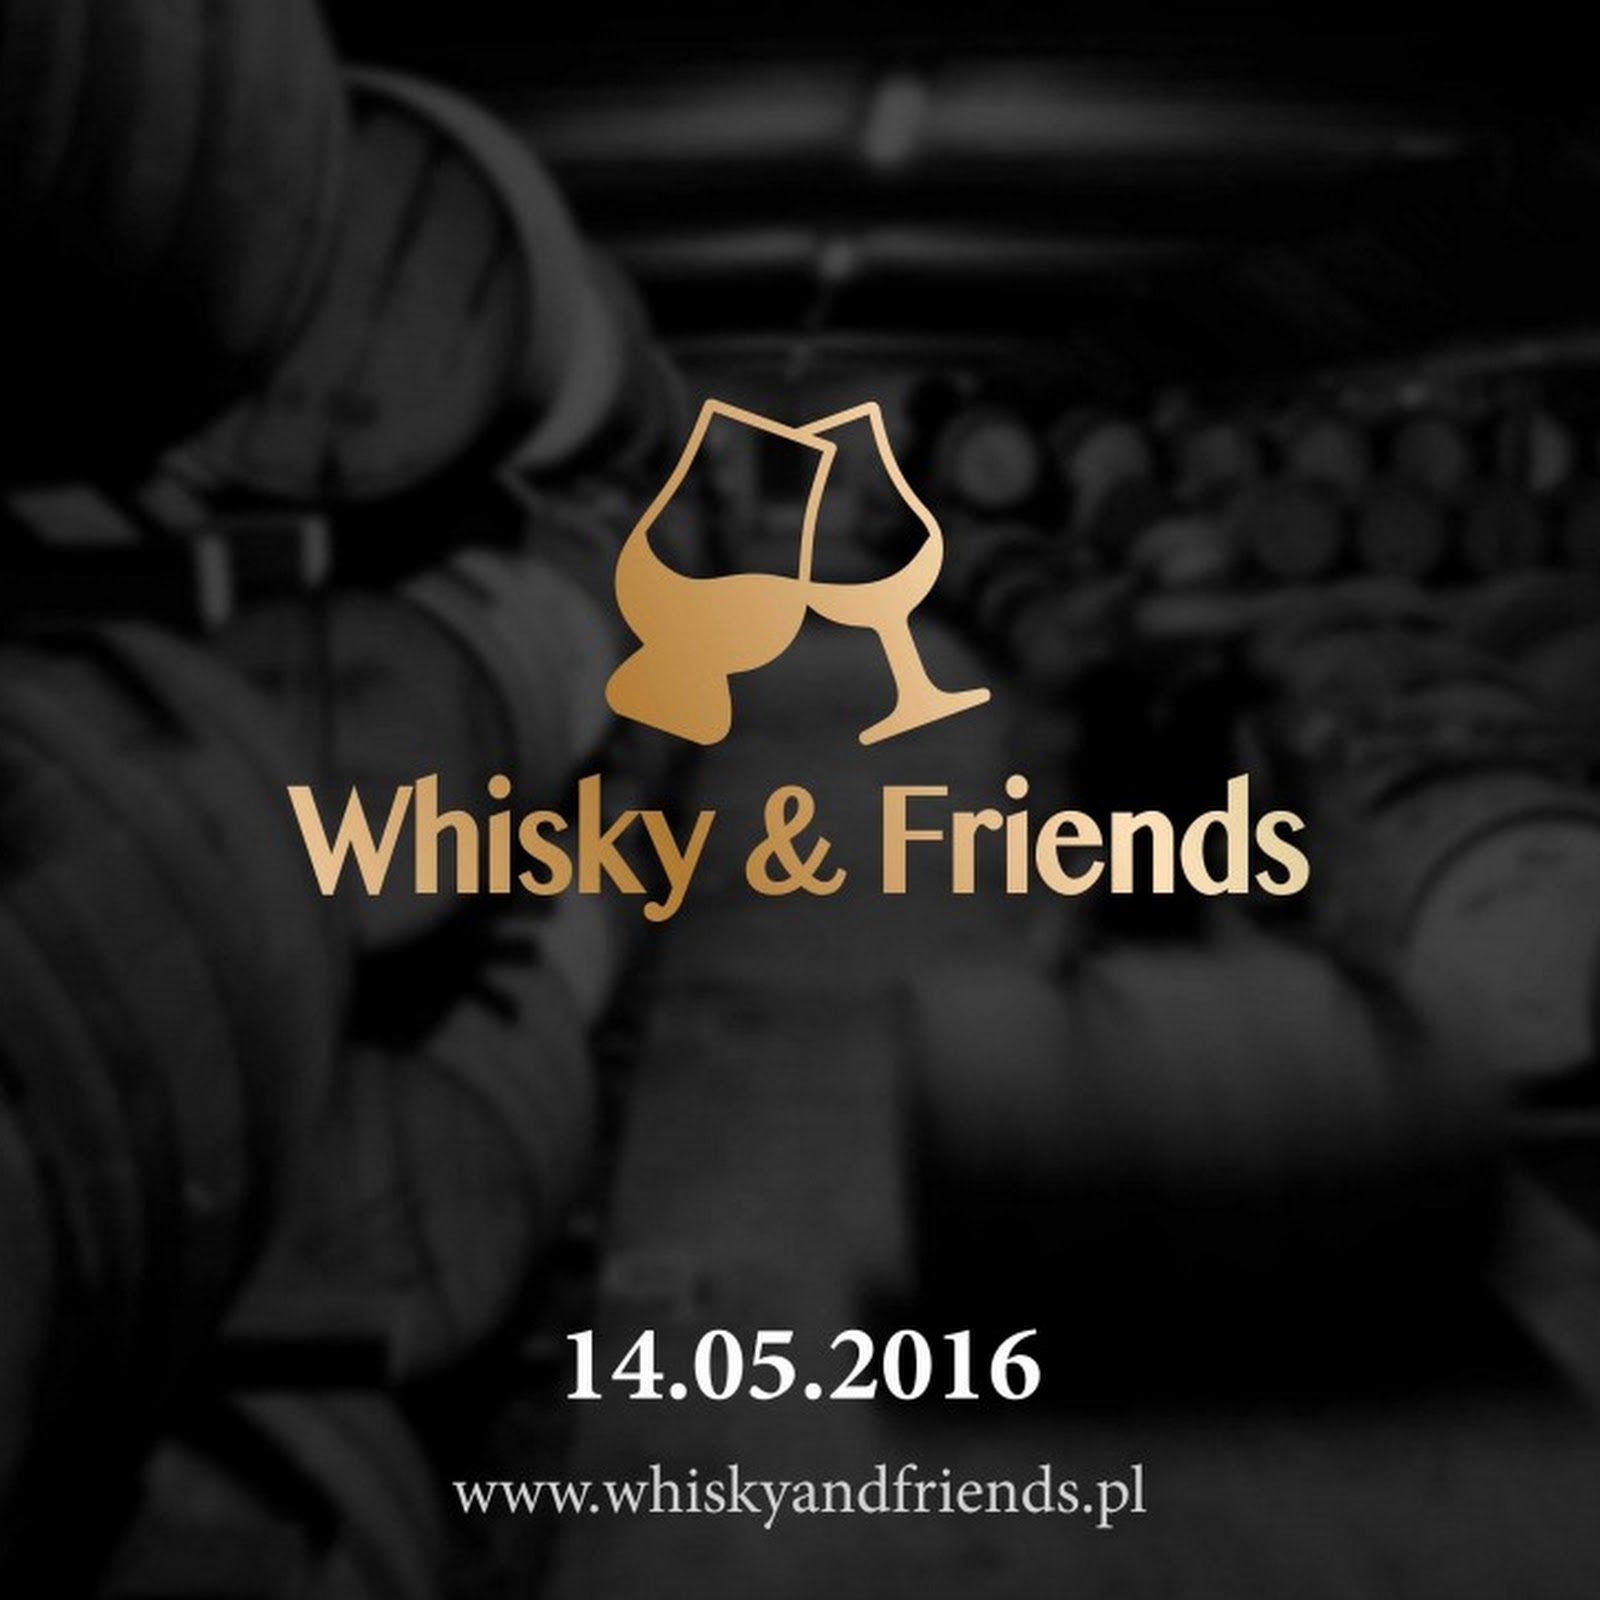 Whisky & Friends